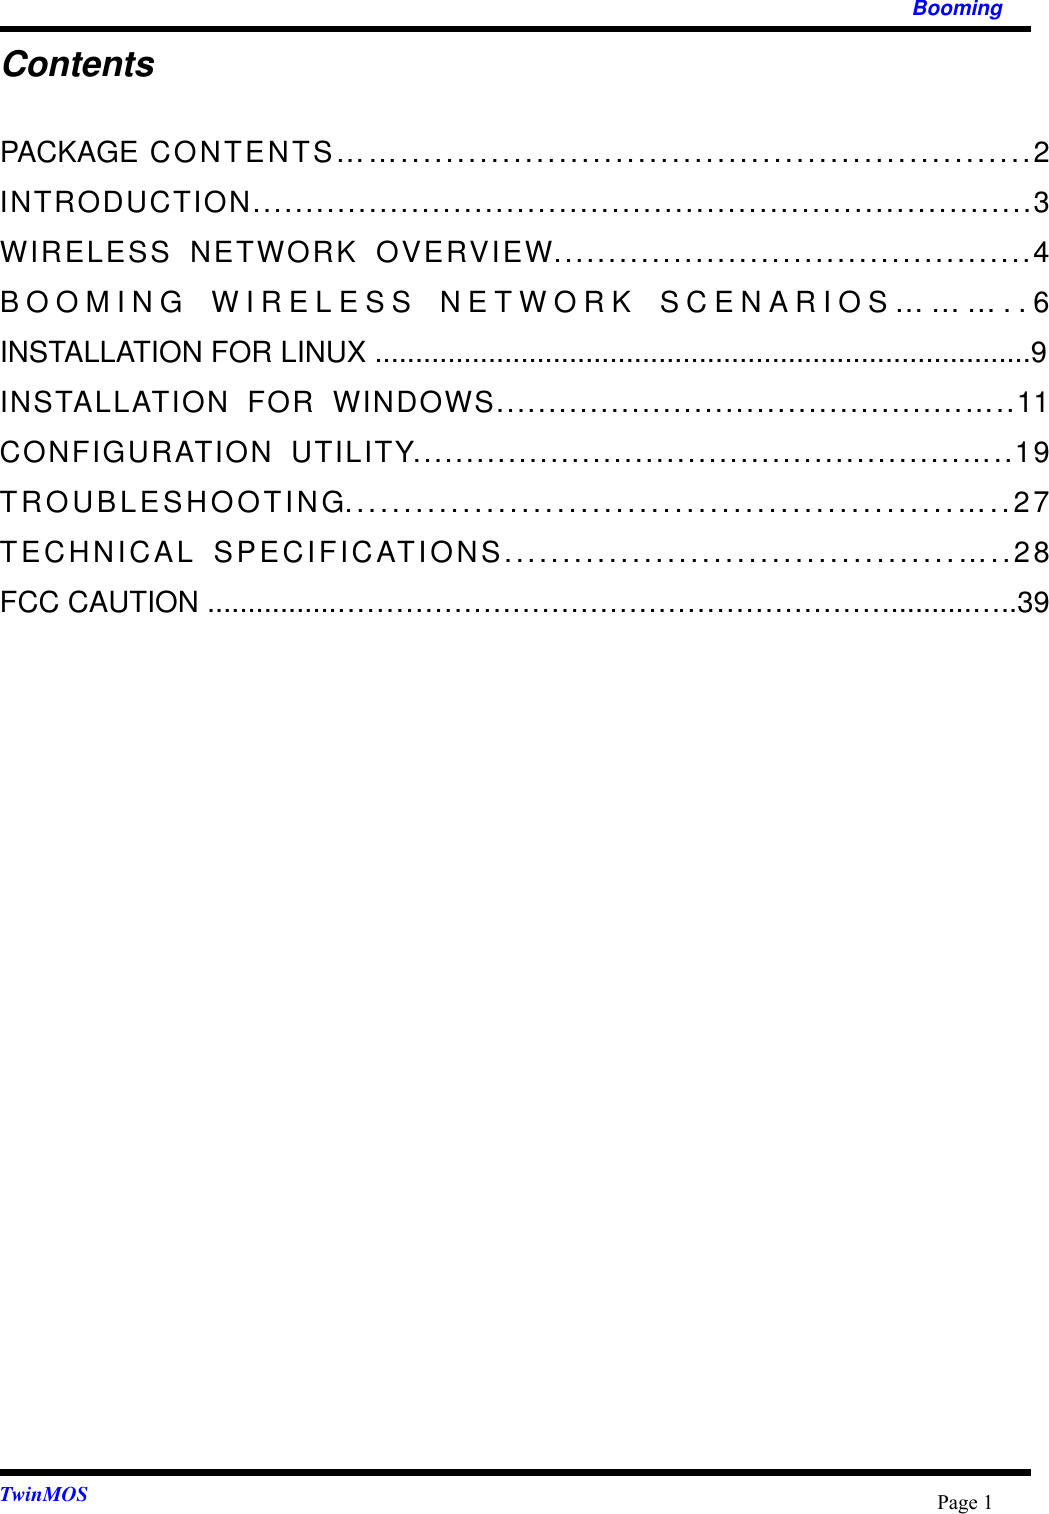   Booming  TwinMOS  Page 1Contents PACKAGE CONTENTS……........................................................2 INTRODUCTION..........................................................................3 WIRELESS NETWORK OVERVIEW............................................4 BOOMING WIRELESS NETWORK SCENARIOS………..6 INSTALLATION FOR LINUX .................................................................................9 INSTALLATION FOR WINDOWS.............................................…..11 CONFIGURATION UTILITY....................................................…..19 TROUBLESHOOTING....................................................…..27 TECHNICAL SPECIFICATIONS.......................................…..28 FCC CAUTION ................…………………………………………………..........…..39  